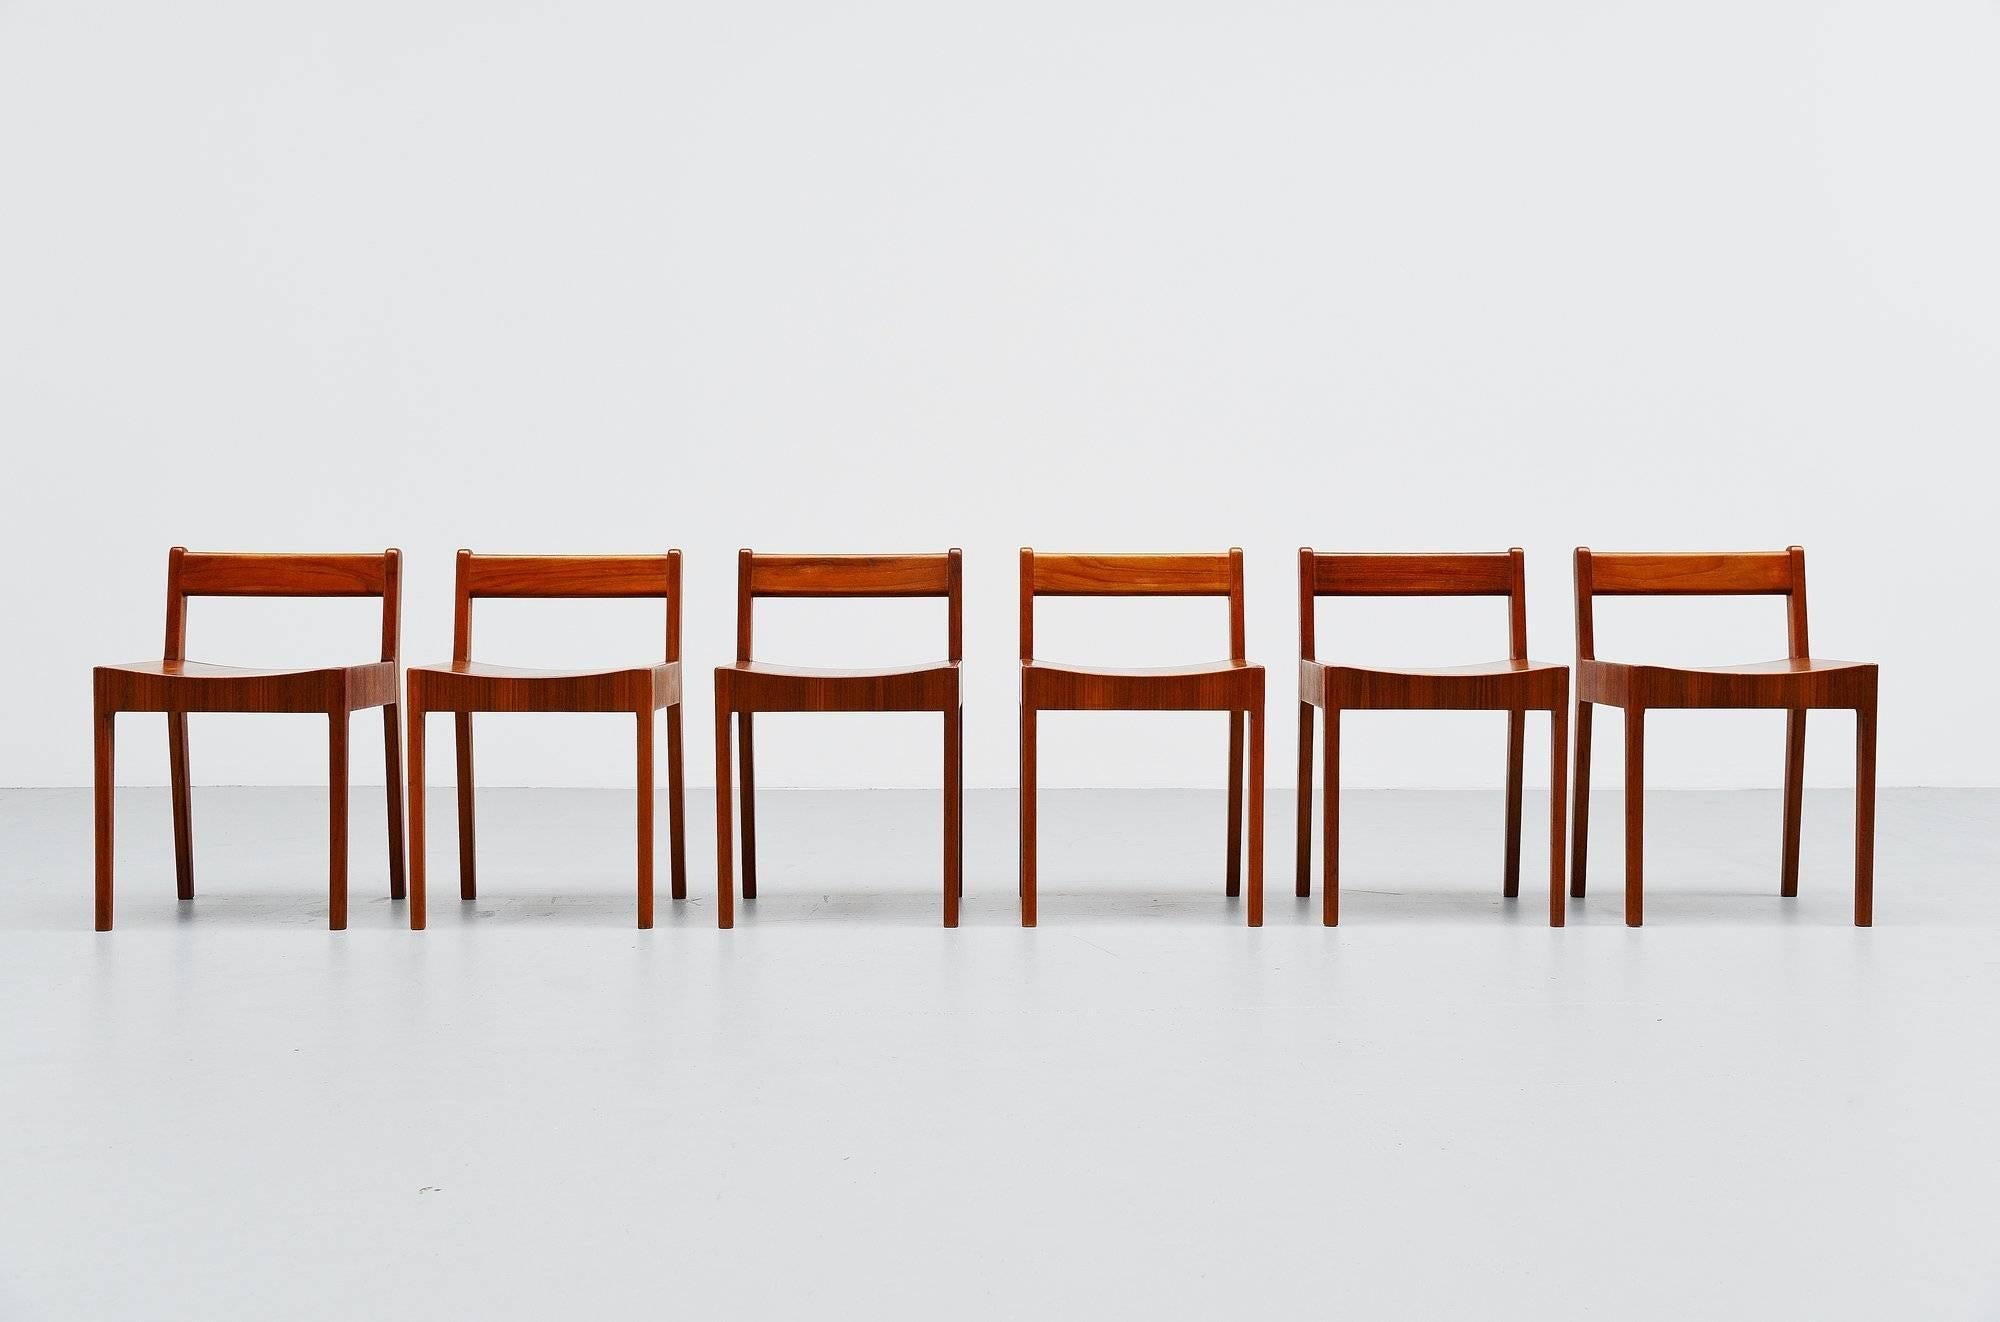 Very nice an unusual small set of breakfast chairs/stools manufactured by Plyfa, unknown designer Denmark 1960. These chairs are made of teak plywood and are fantastically made or finished. To me they are designed in the style of Jens Quistgaard, or